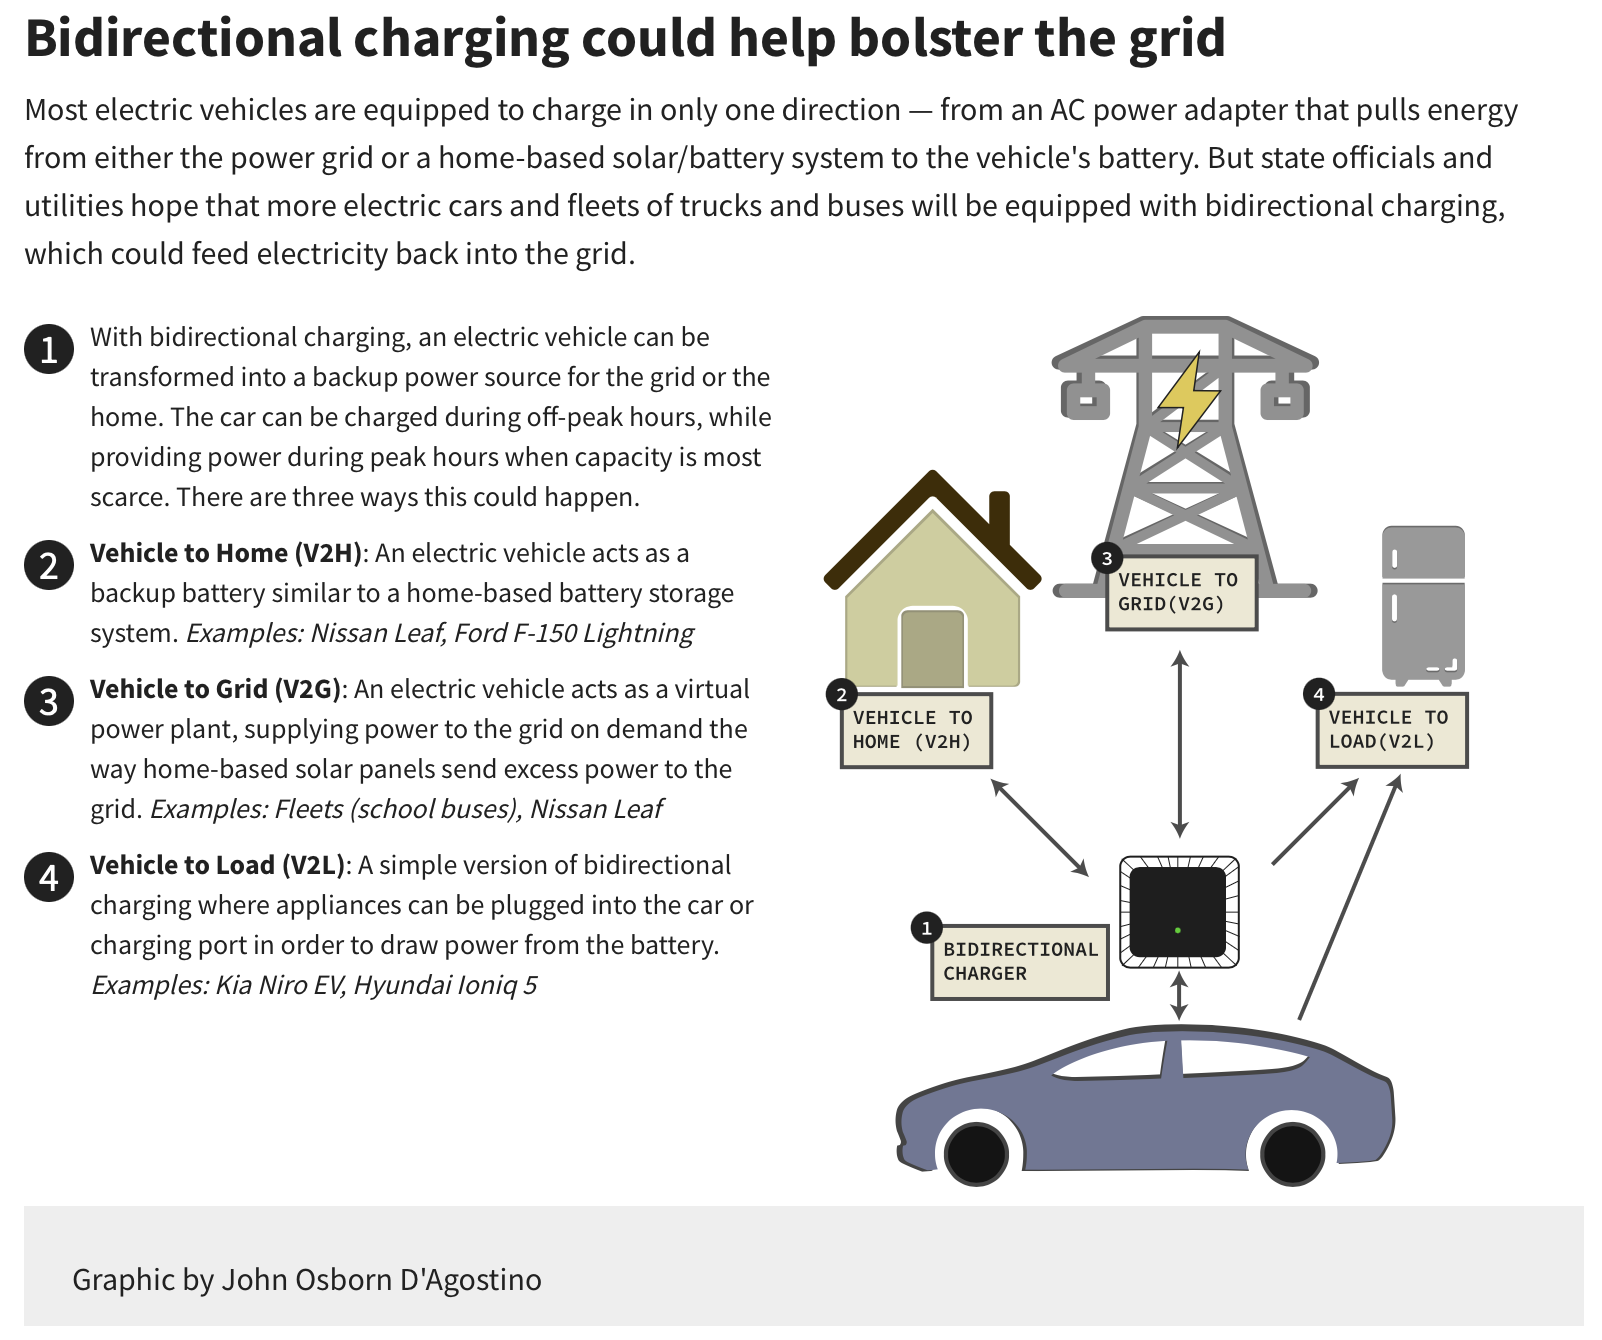 A graphic image demonstrating how biodirectional charging can help bolster the power grid. A cartoon-like electric vehicle is pictured with various arrows pointing toward different areas it could help charge such as a transformer, home and a refrigerator.